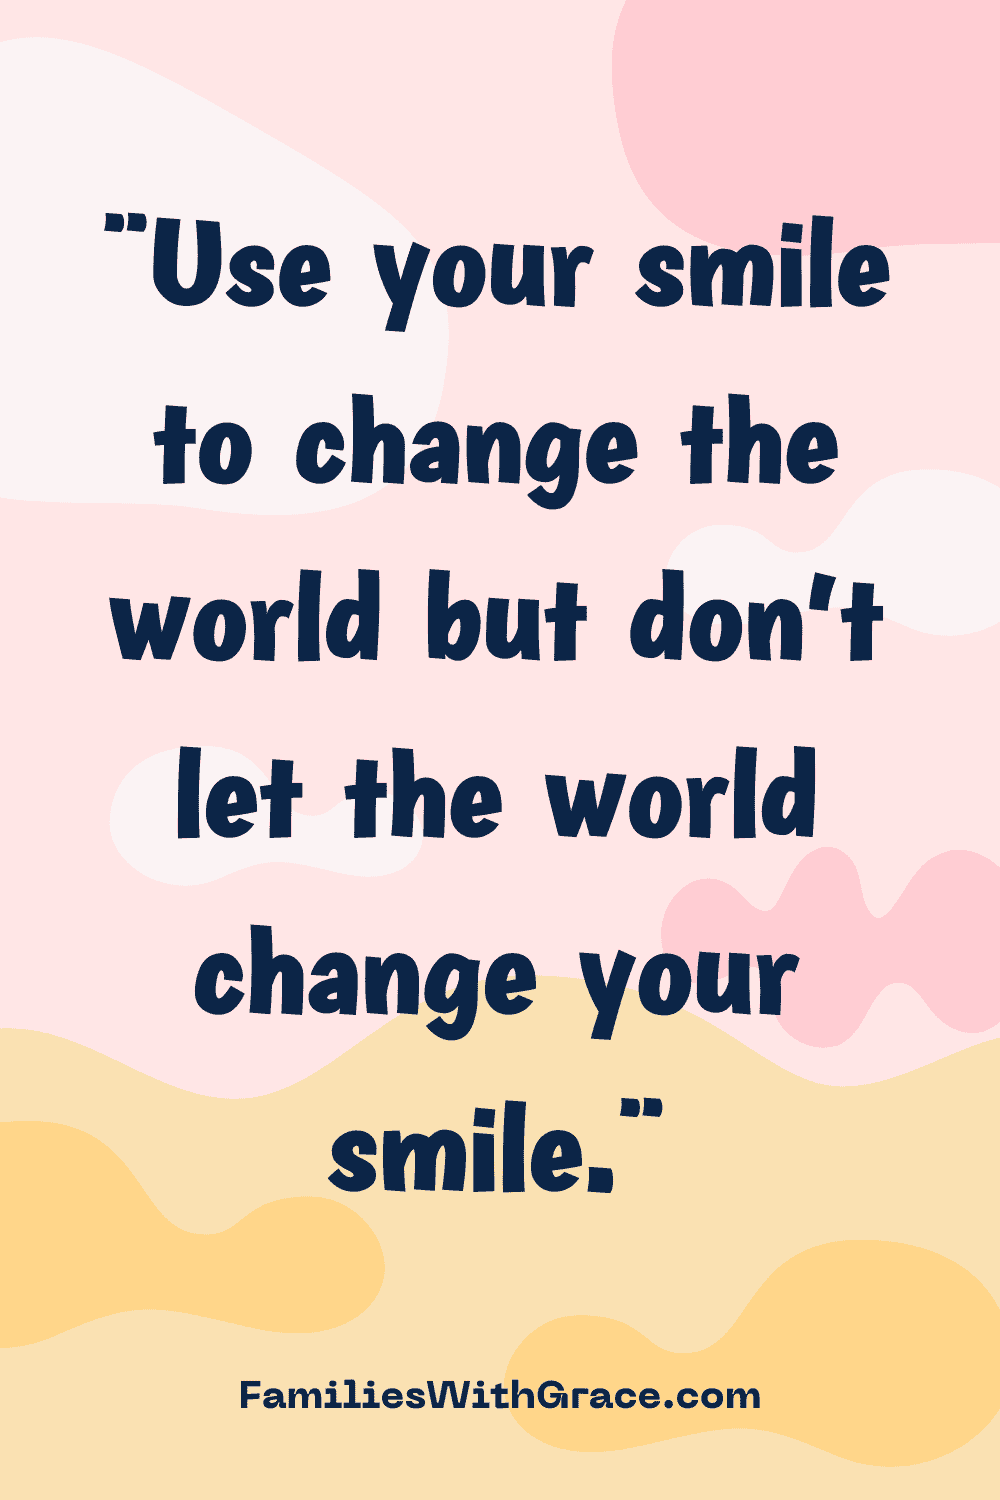 The power of smiling